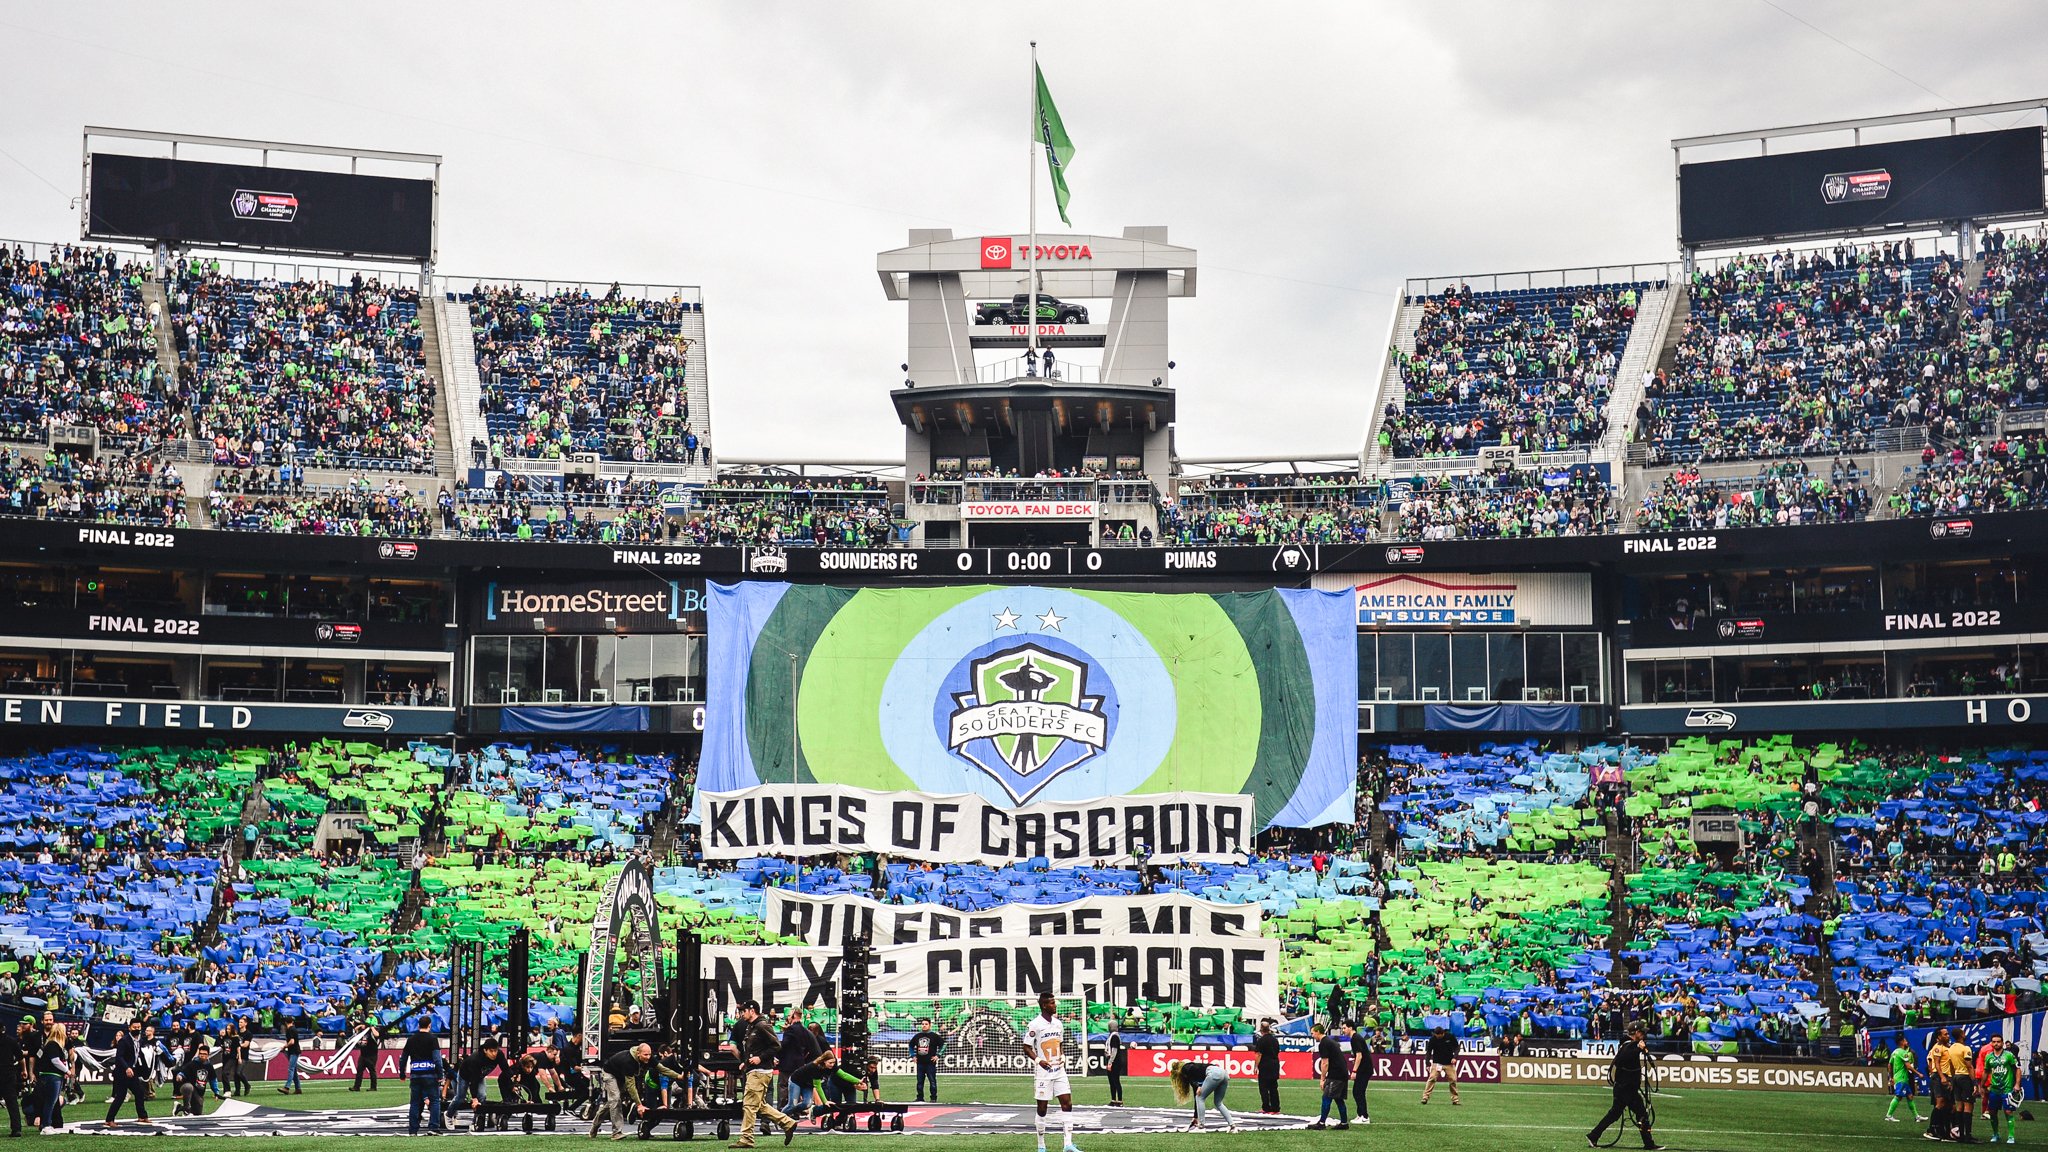 Seattle Sounders set CCL attendance record in 2022 Final vs. Pumas | MLSSoccer.com